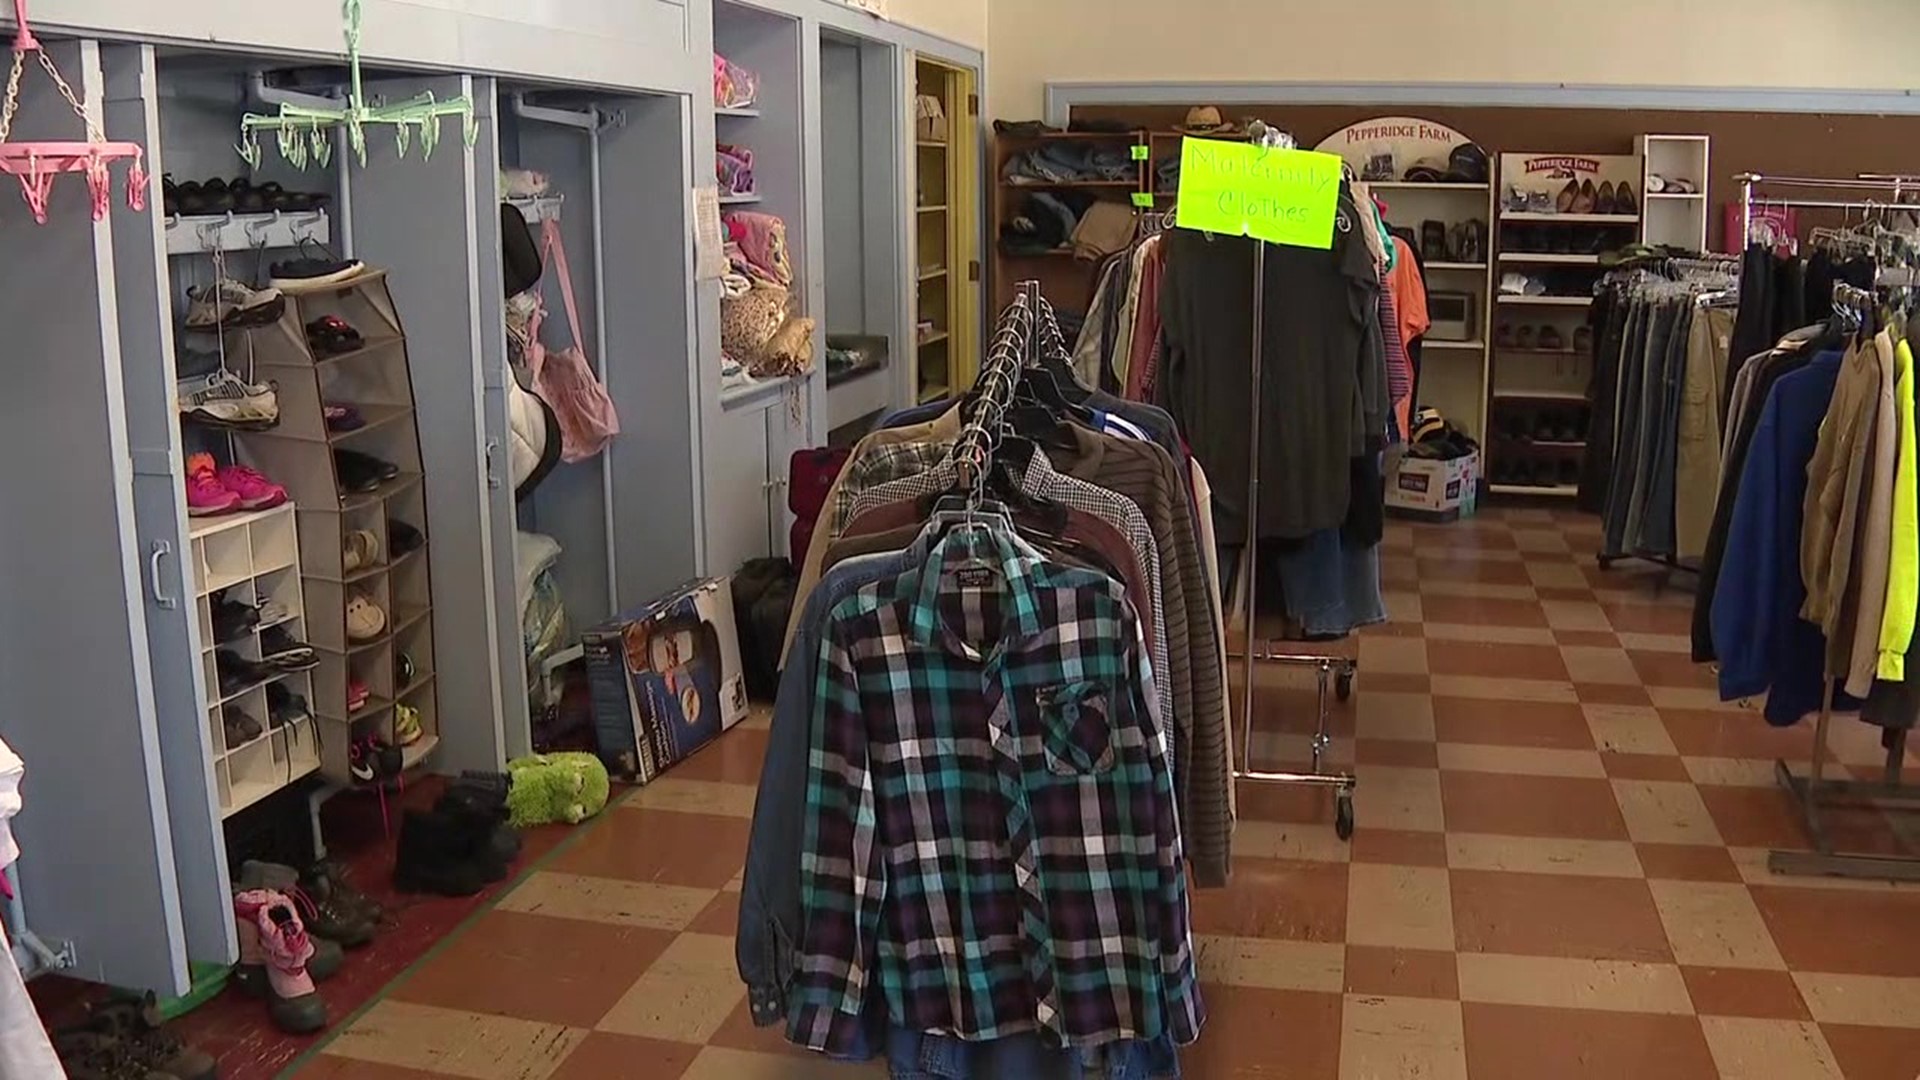 After being closed for almost a year because of the pandemic, a thrift store in Monroe County is back open.